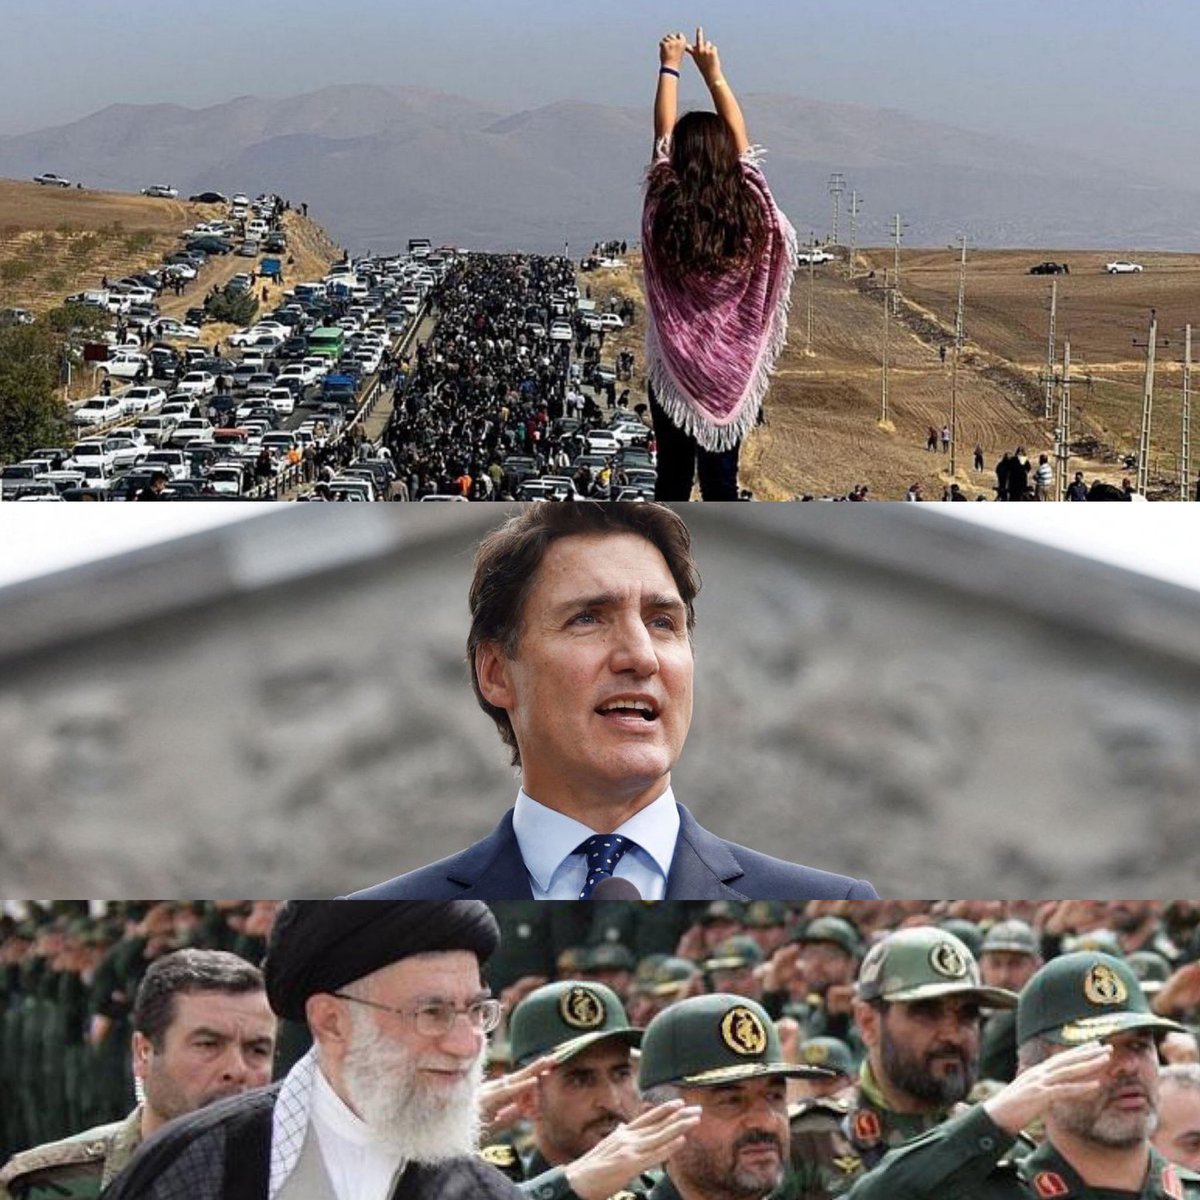 Justin Trudeau: Which Side of History Will You Choose? The people or the terrorists? We Iranians welcome the Canadian Parliament’s historic decision to designate the Revolutionary Guards as a terrorist organization. I hope other parliaments across democracies follow this path.